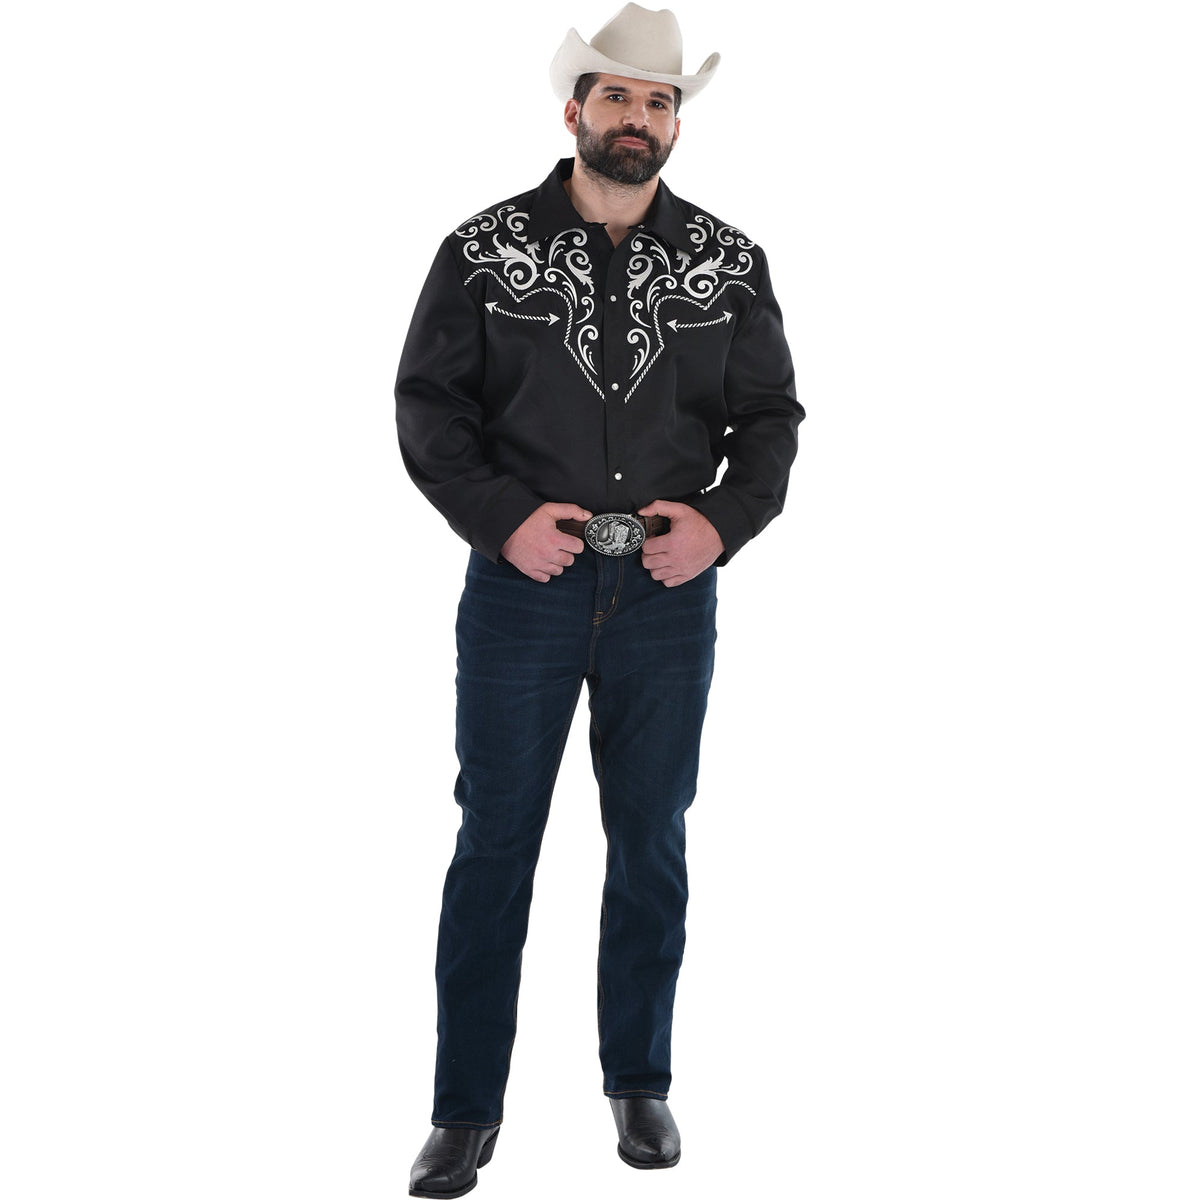 HALLOWEEN COSTUME CO. Costume Accessories Western Cowboy Shirt for Plus Size Adults, Black and White 192937452370